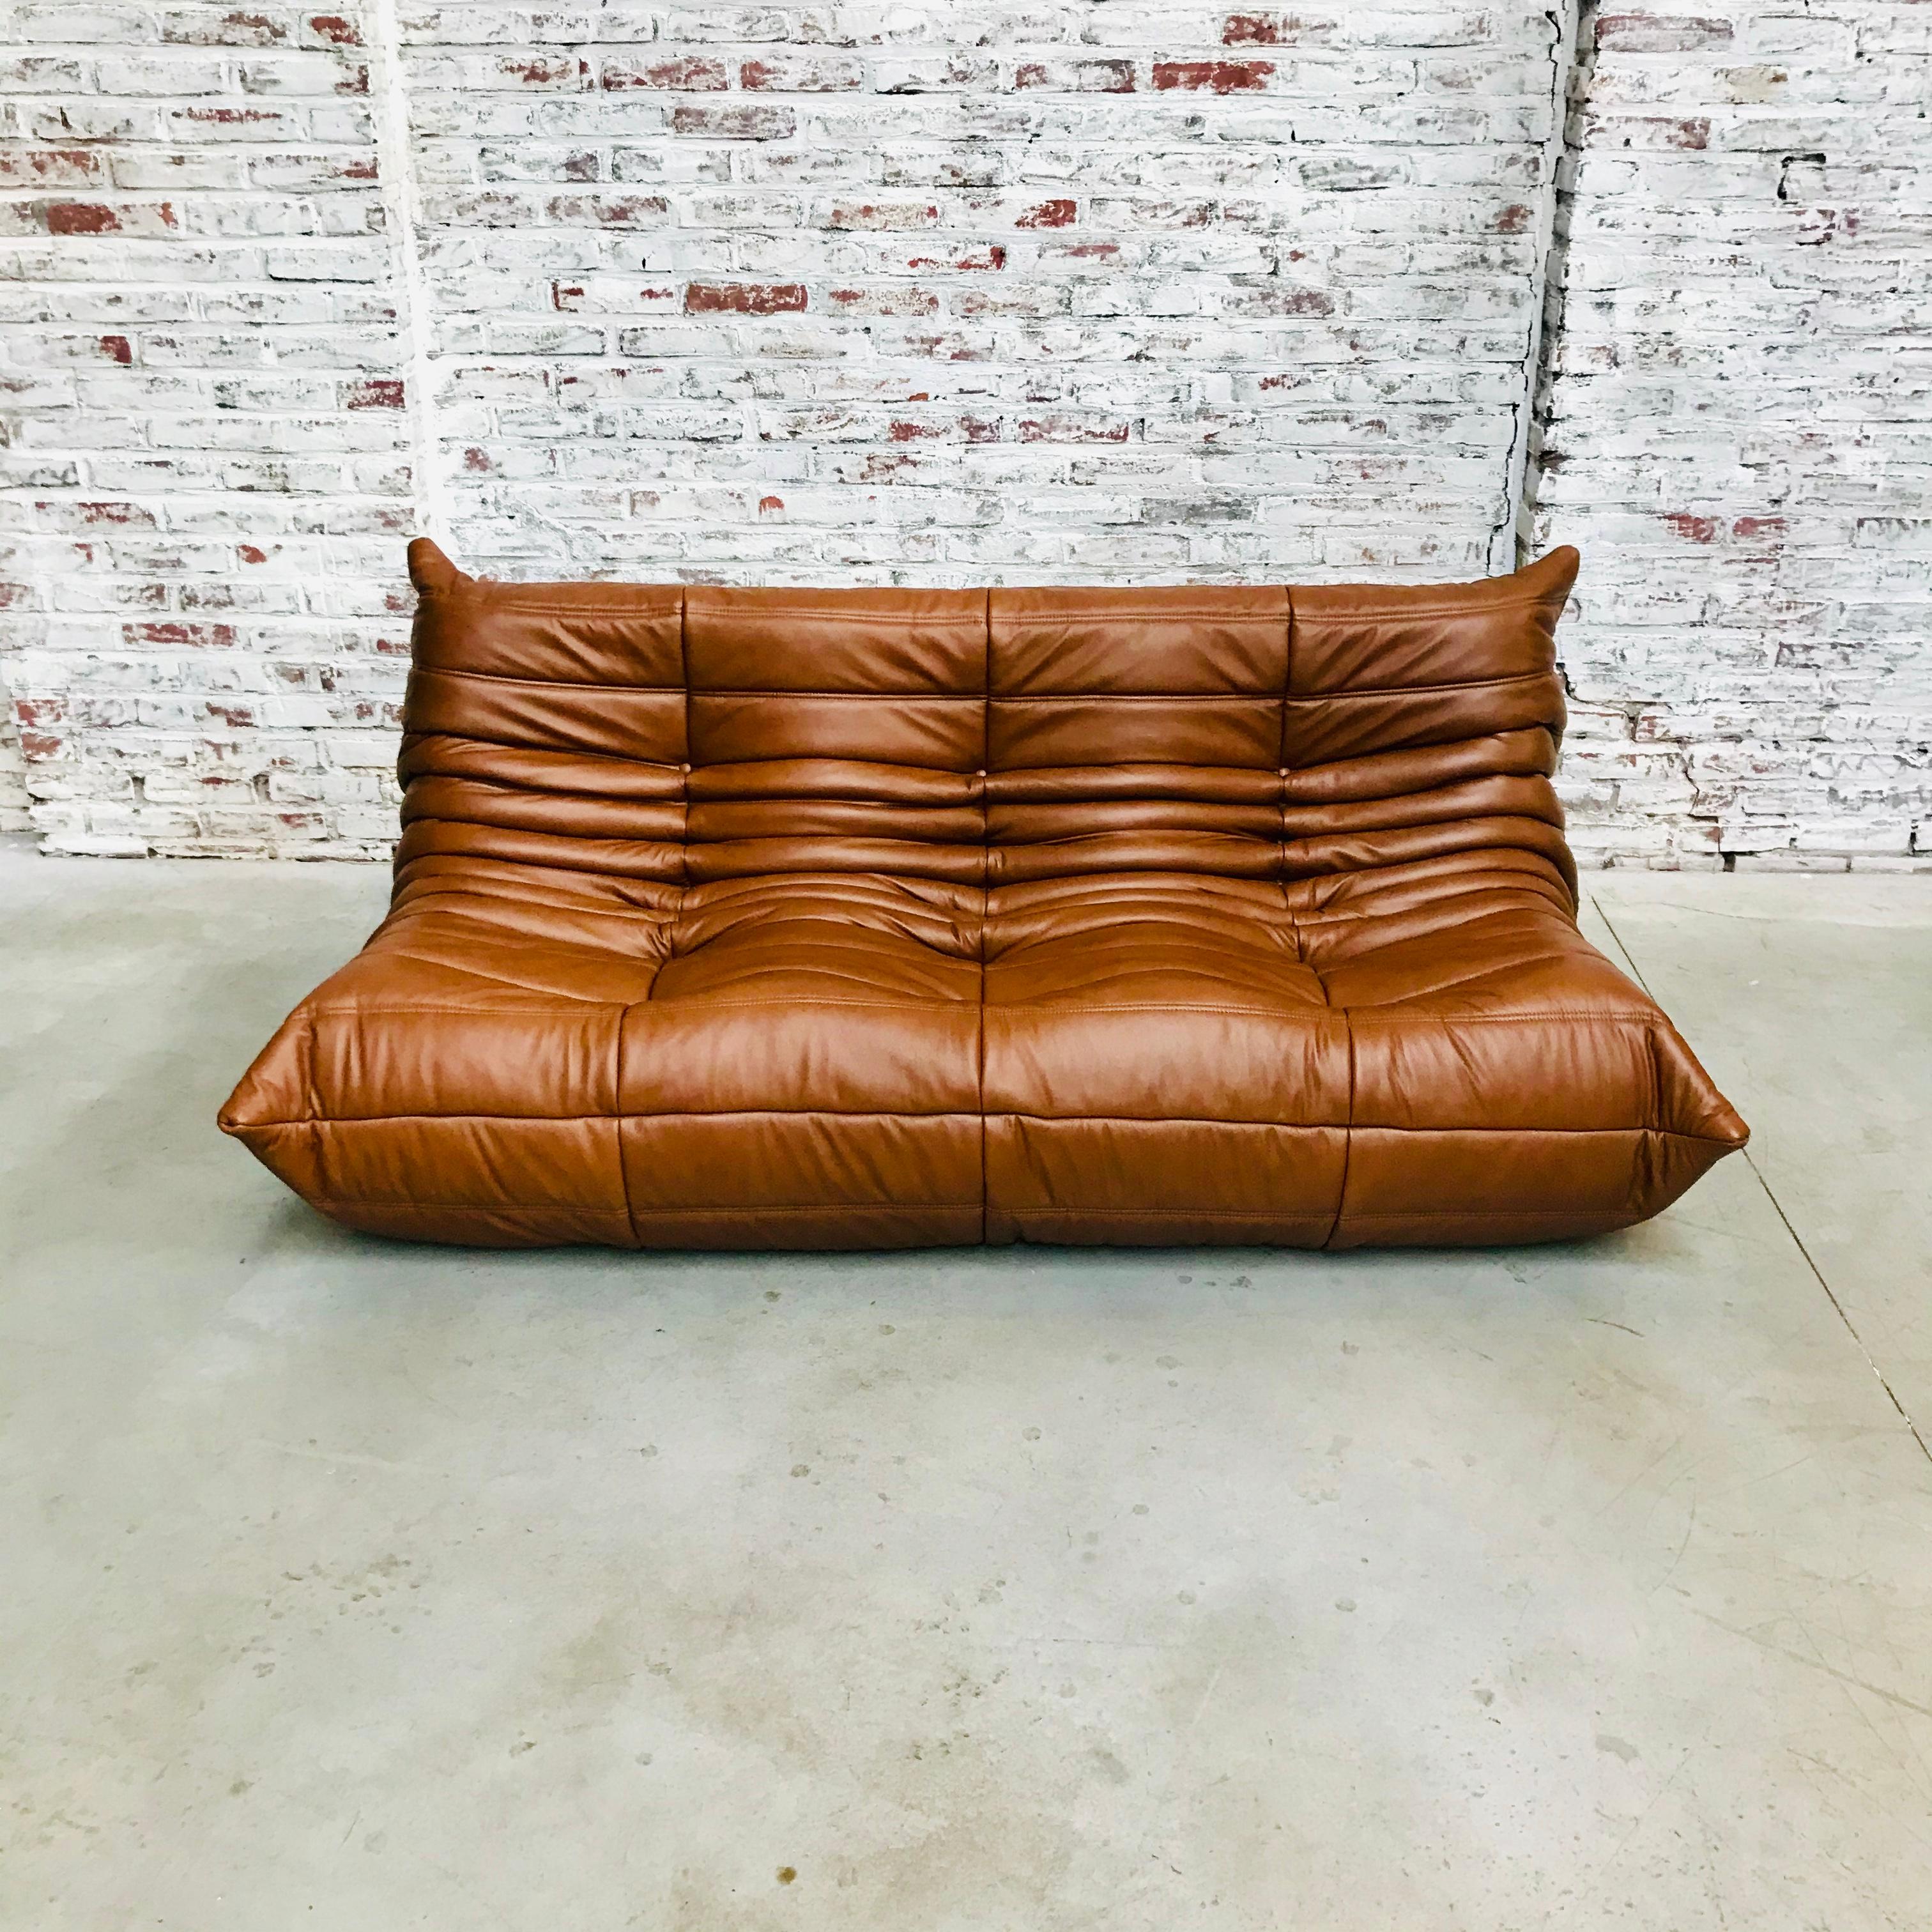 In 1973 Michel Ducaroy has produced one of the world’s most famous designer icons: The Togo, the sectional sofa. Manufactured by Ligne Roset in France.